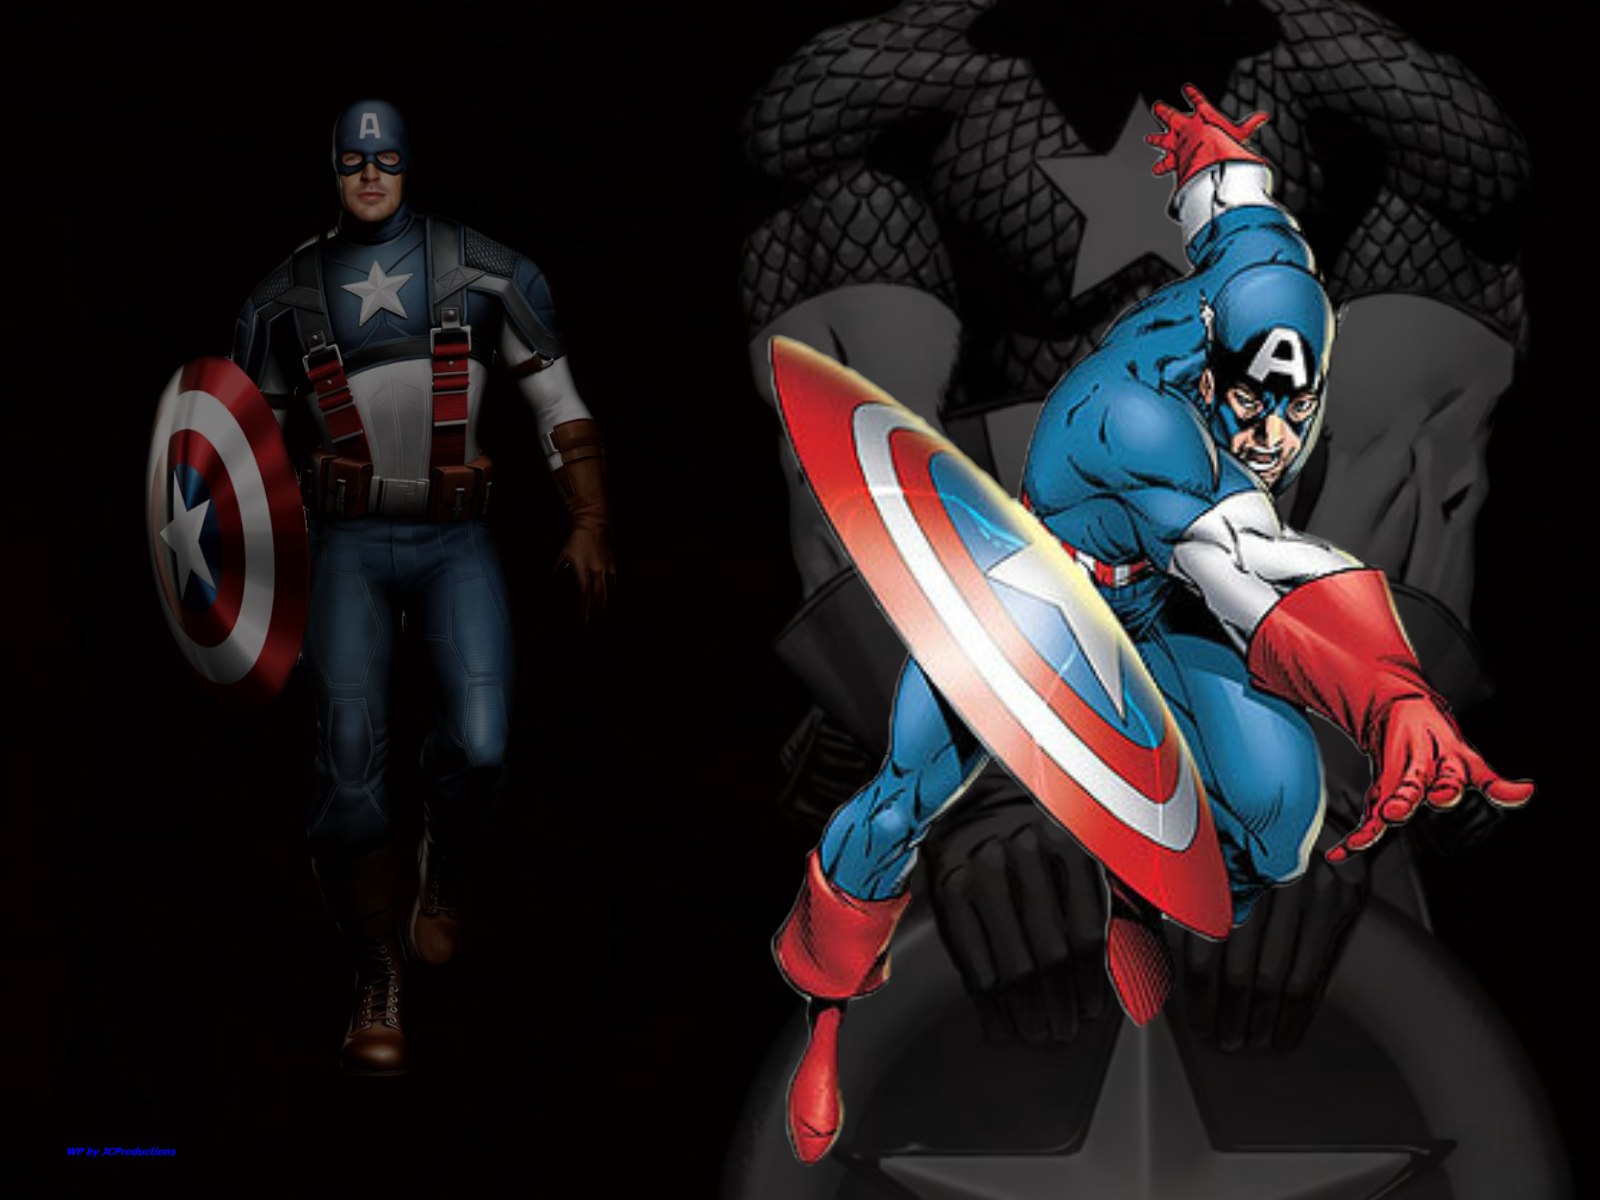 Download High quality comic books, captain america, america, captain, the shield, red white and blue, first avenger Captain America wallpaper / 1600x1200